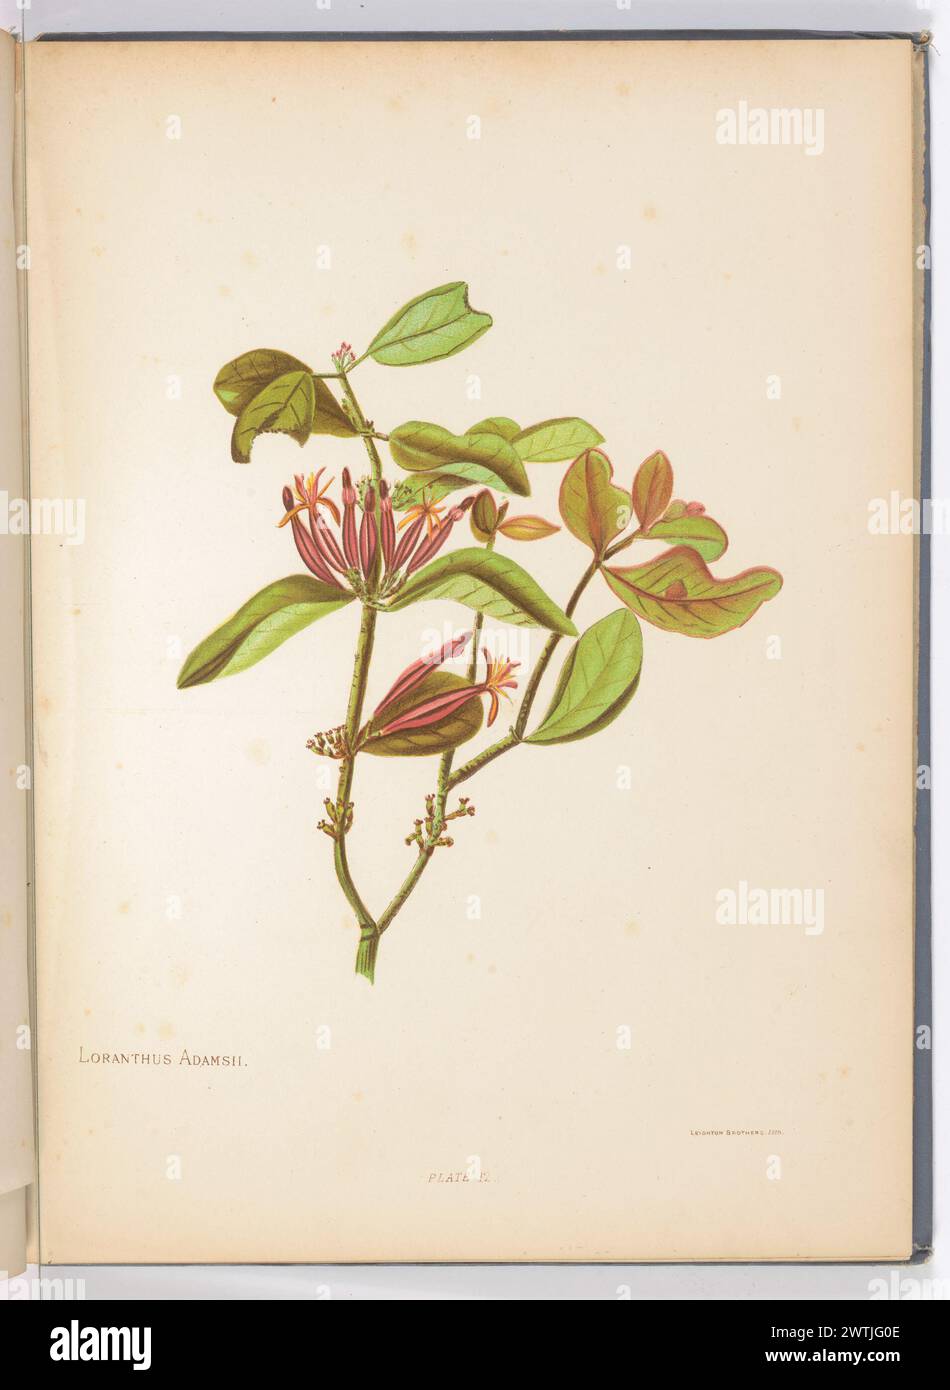 Loranthus Adamsii. Plate 12 from the book: The native flowers of New Zealand Stock Photo